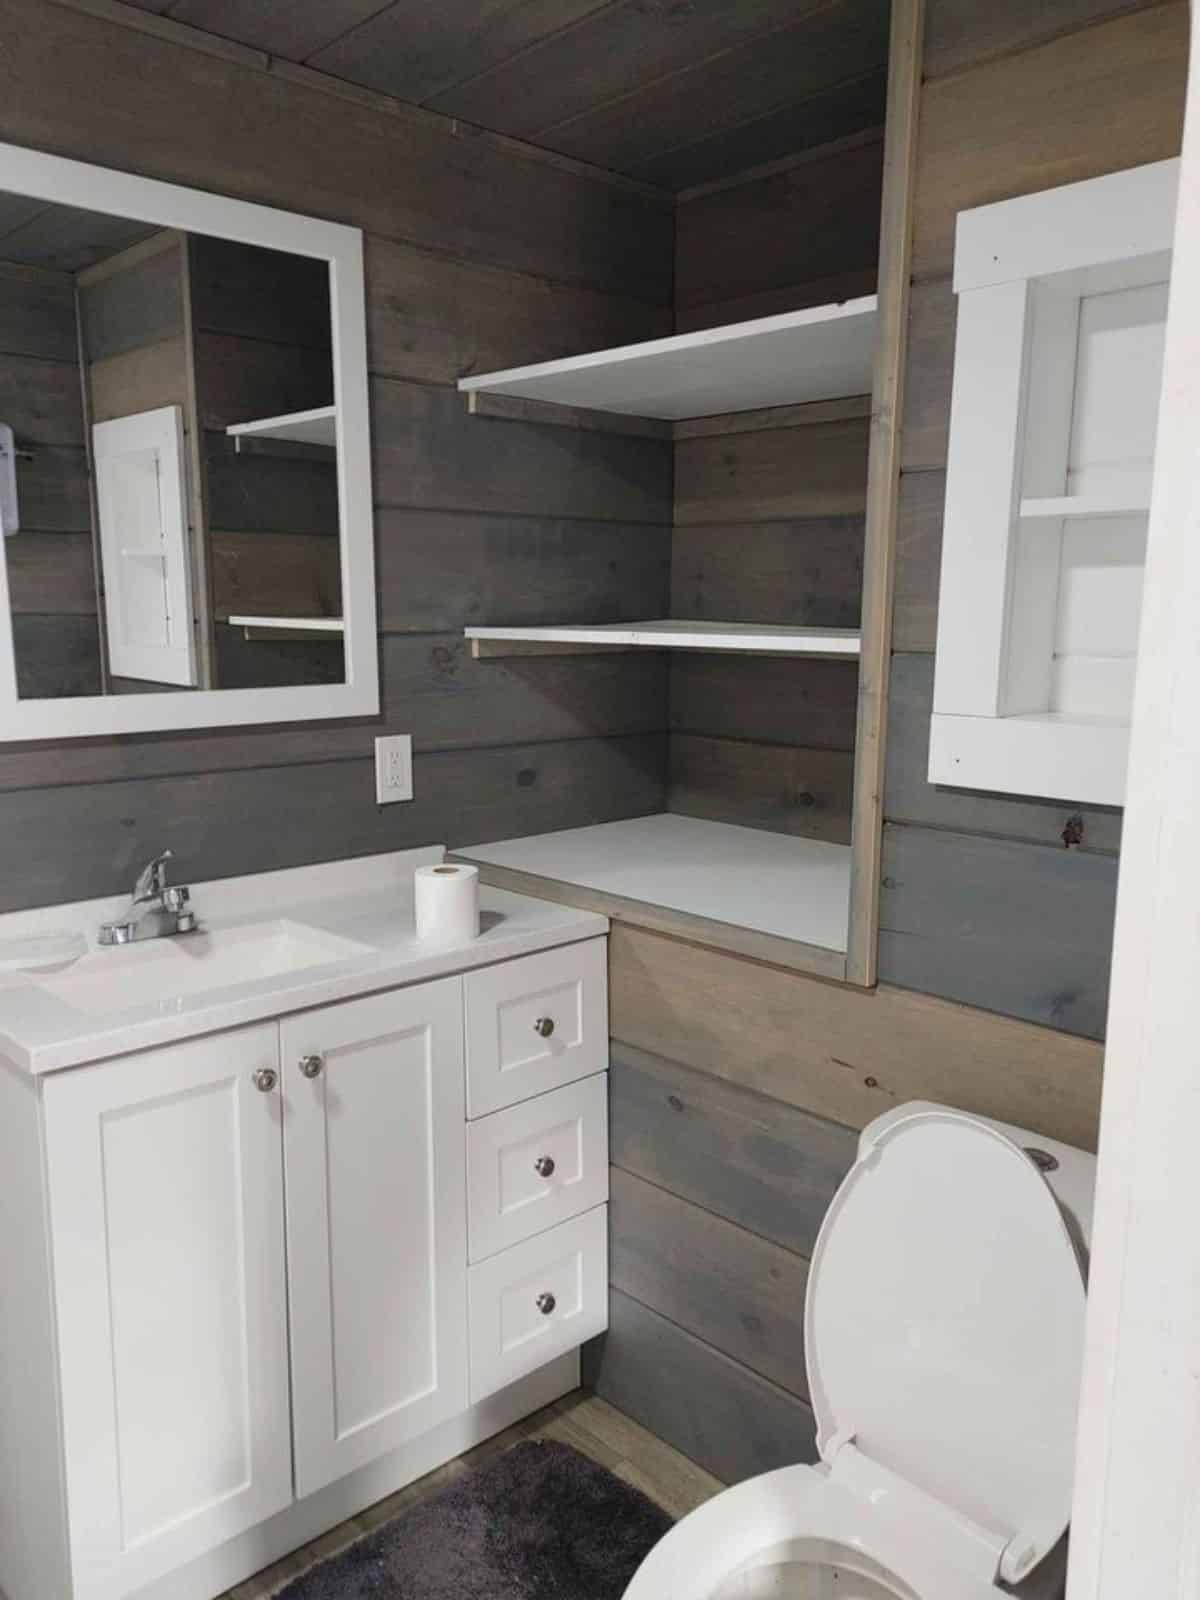 Storage in bathroom to keep clothes and other items